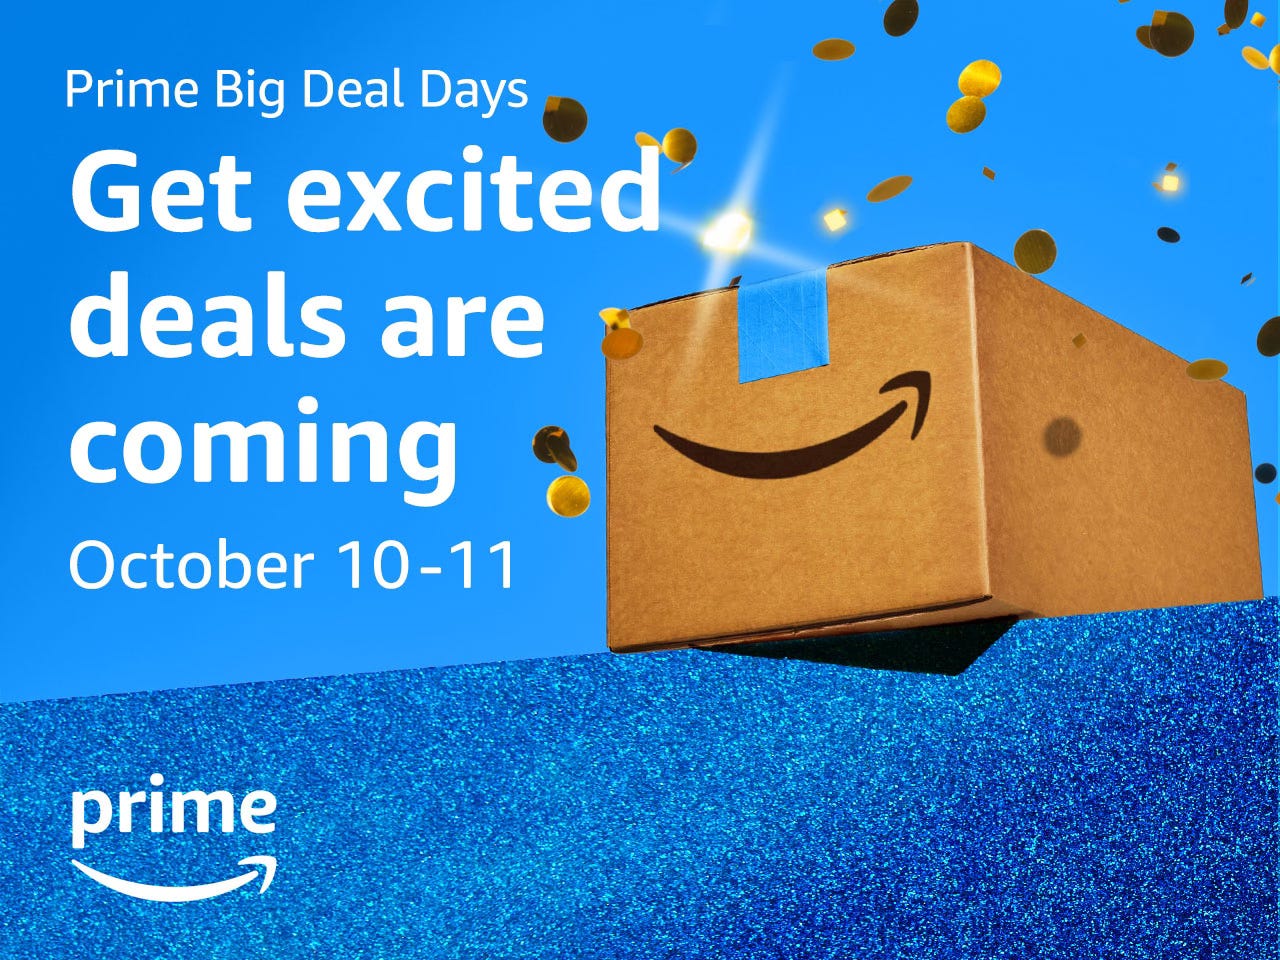 Amazon Prime Big Deal Days, October 10 and 11.